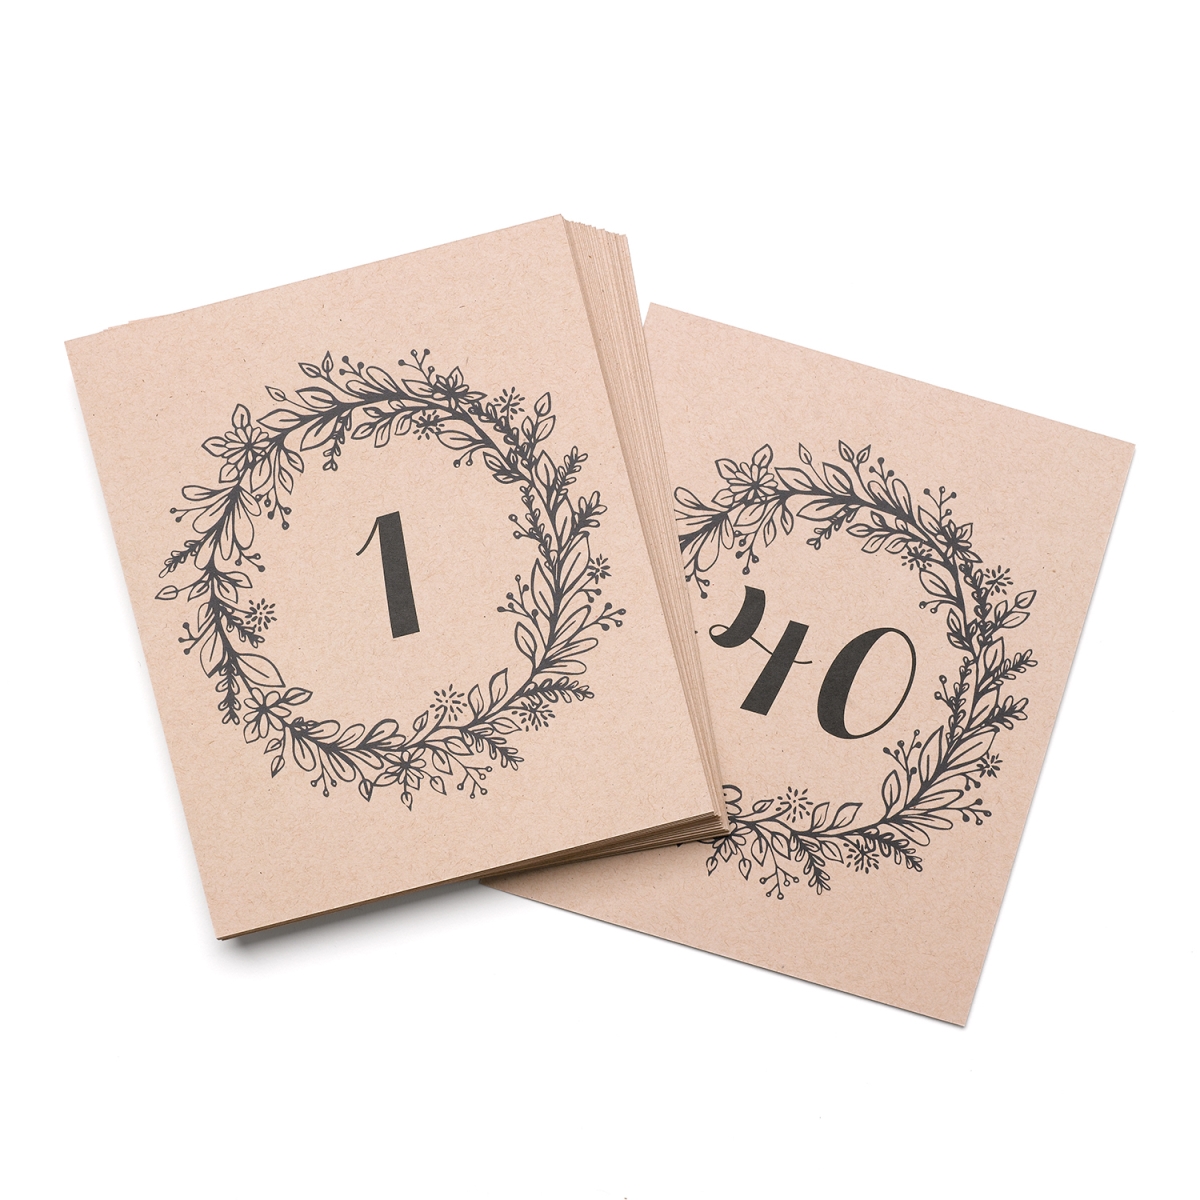 Picture of Hortense B. Hewitt 54866 Rustic Wreath Table Number Cards - 1-40 - Pack of 40